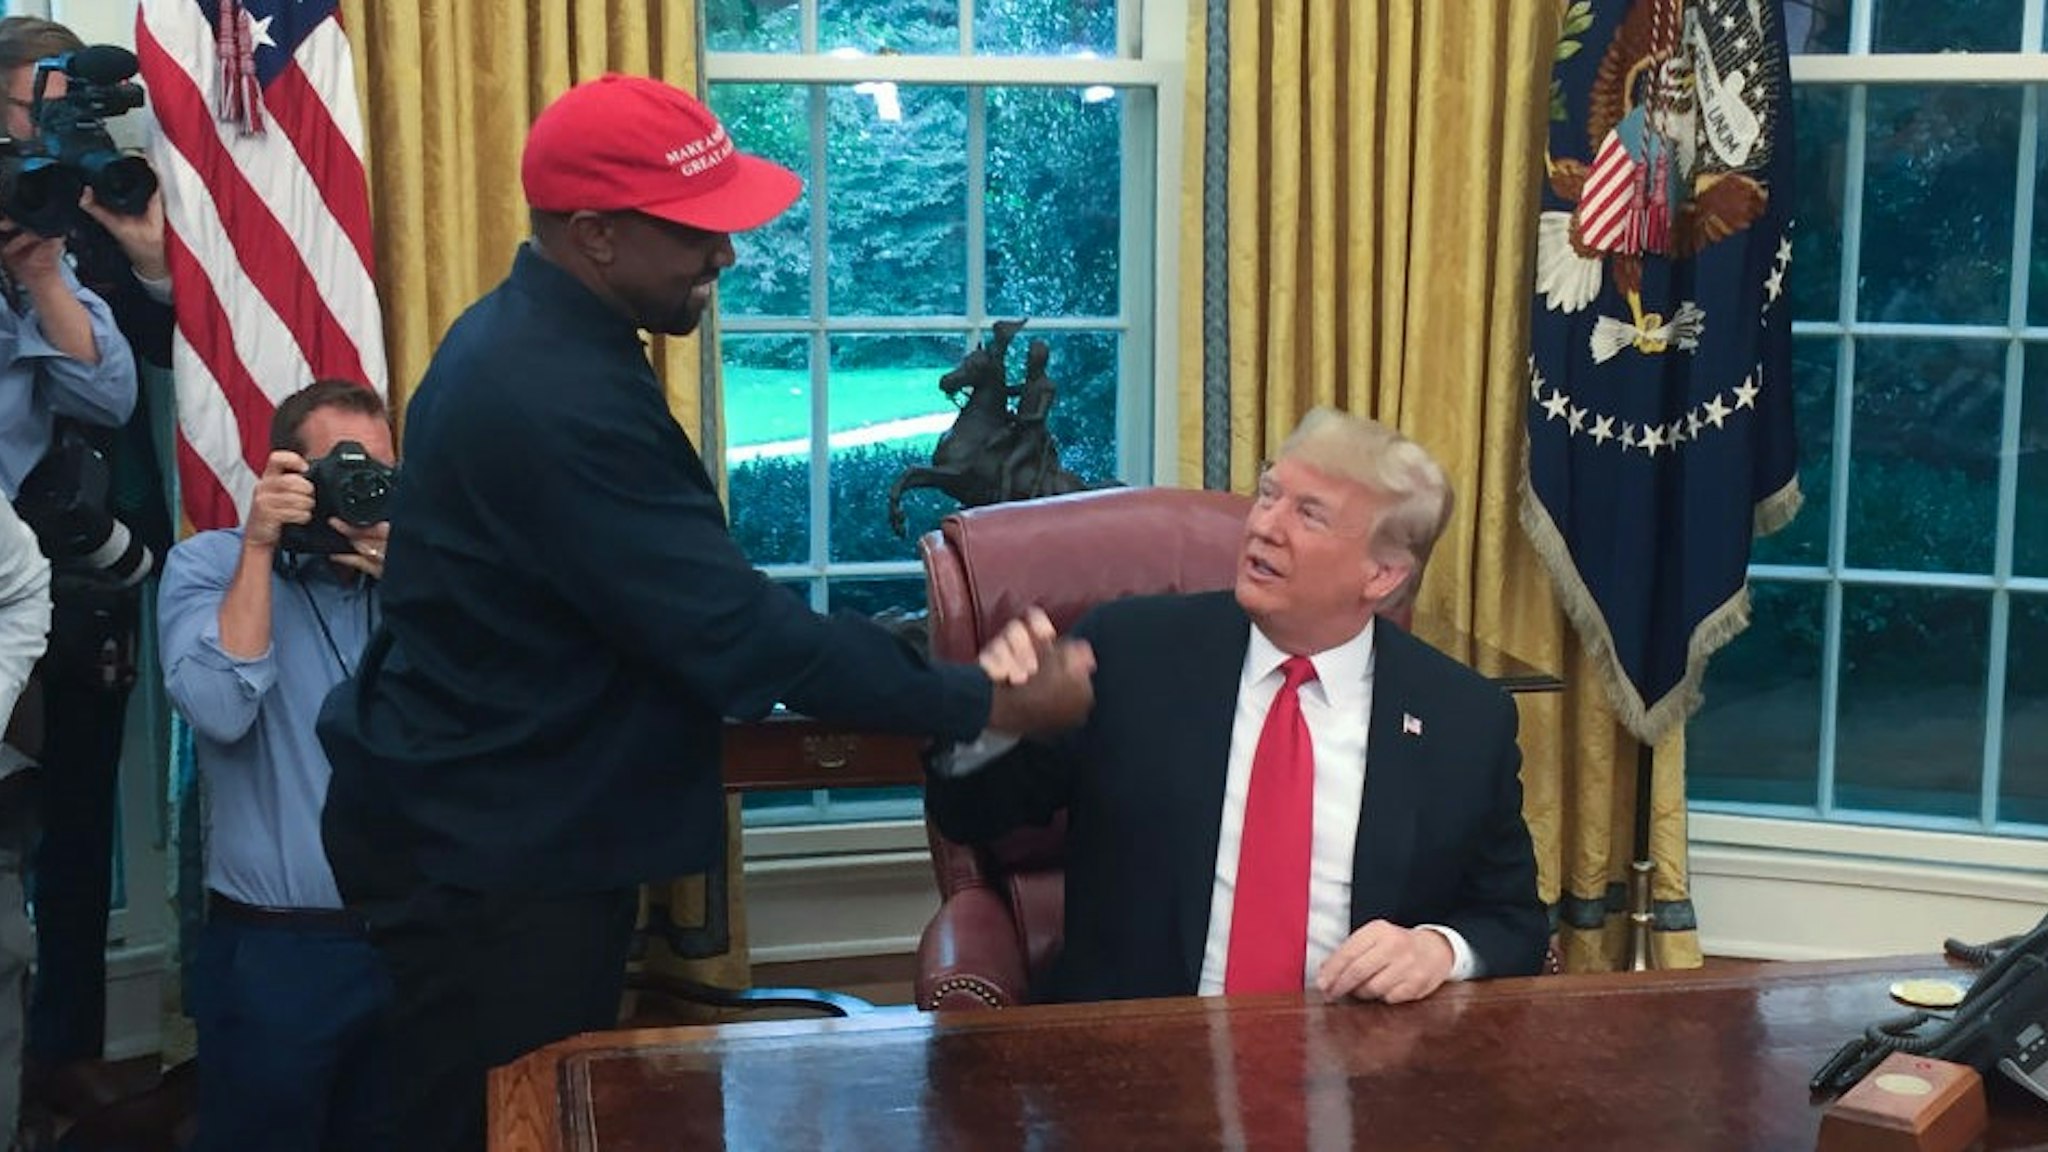 (Files) in this file photo US President Donald Trump meets with rapper Kanye West in the Oval Office of the White House in Washington, DC, October 11, 2018. - Rapper Kanye West, who has been outspoken in his support for President Donald Trump, now says he's going to focus on his music and fashion after being "used" in the world of politics, October 30, 2018.